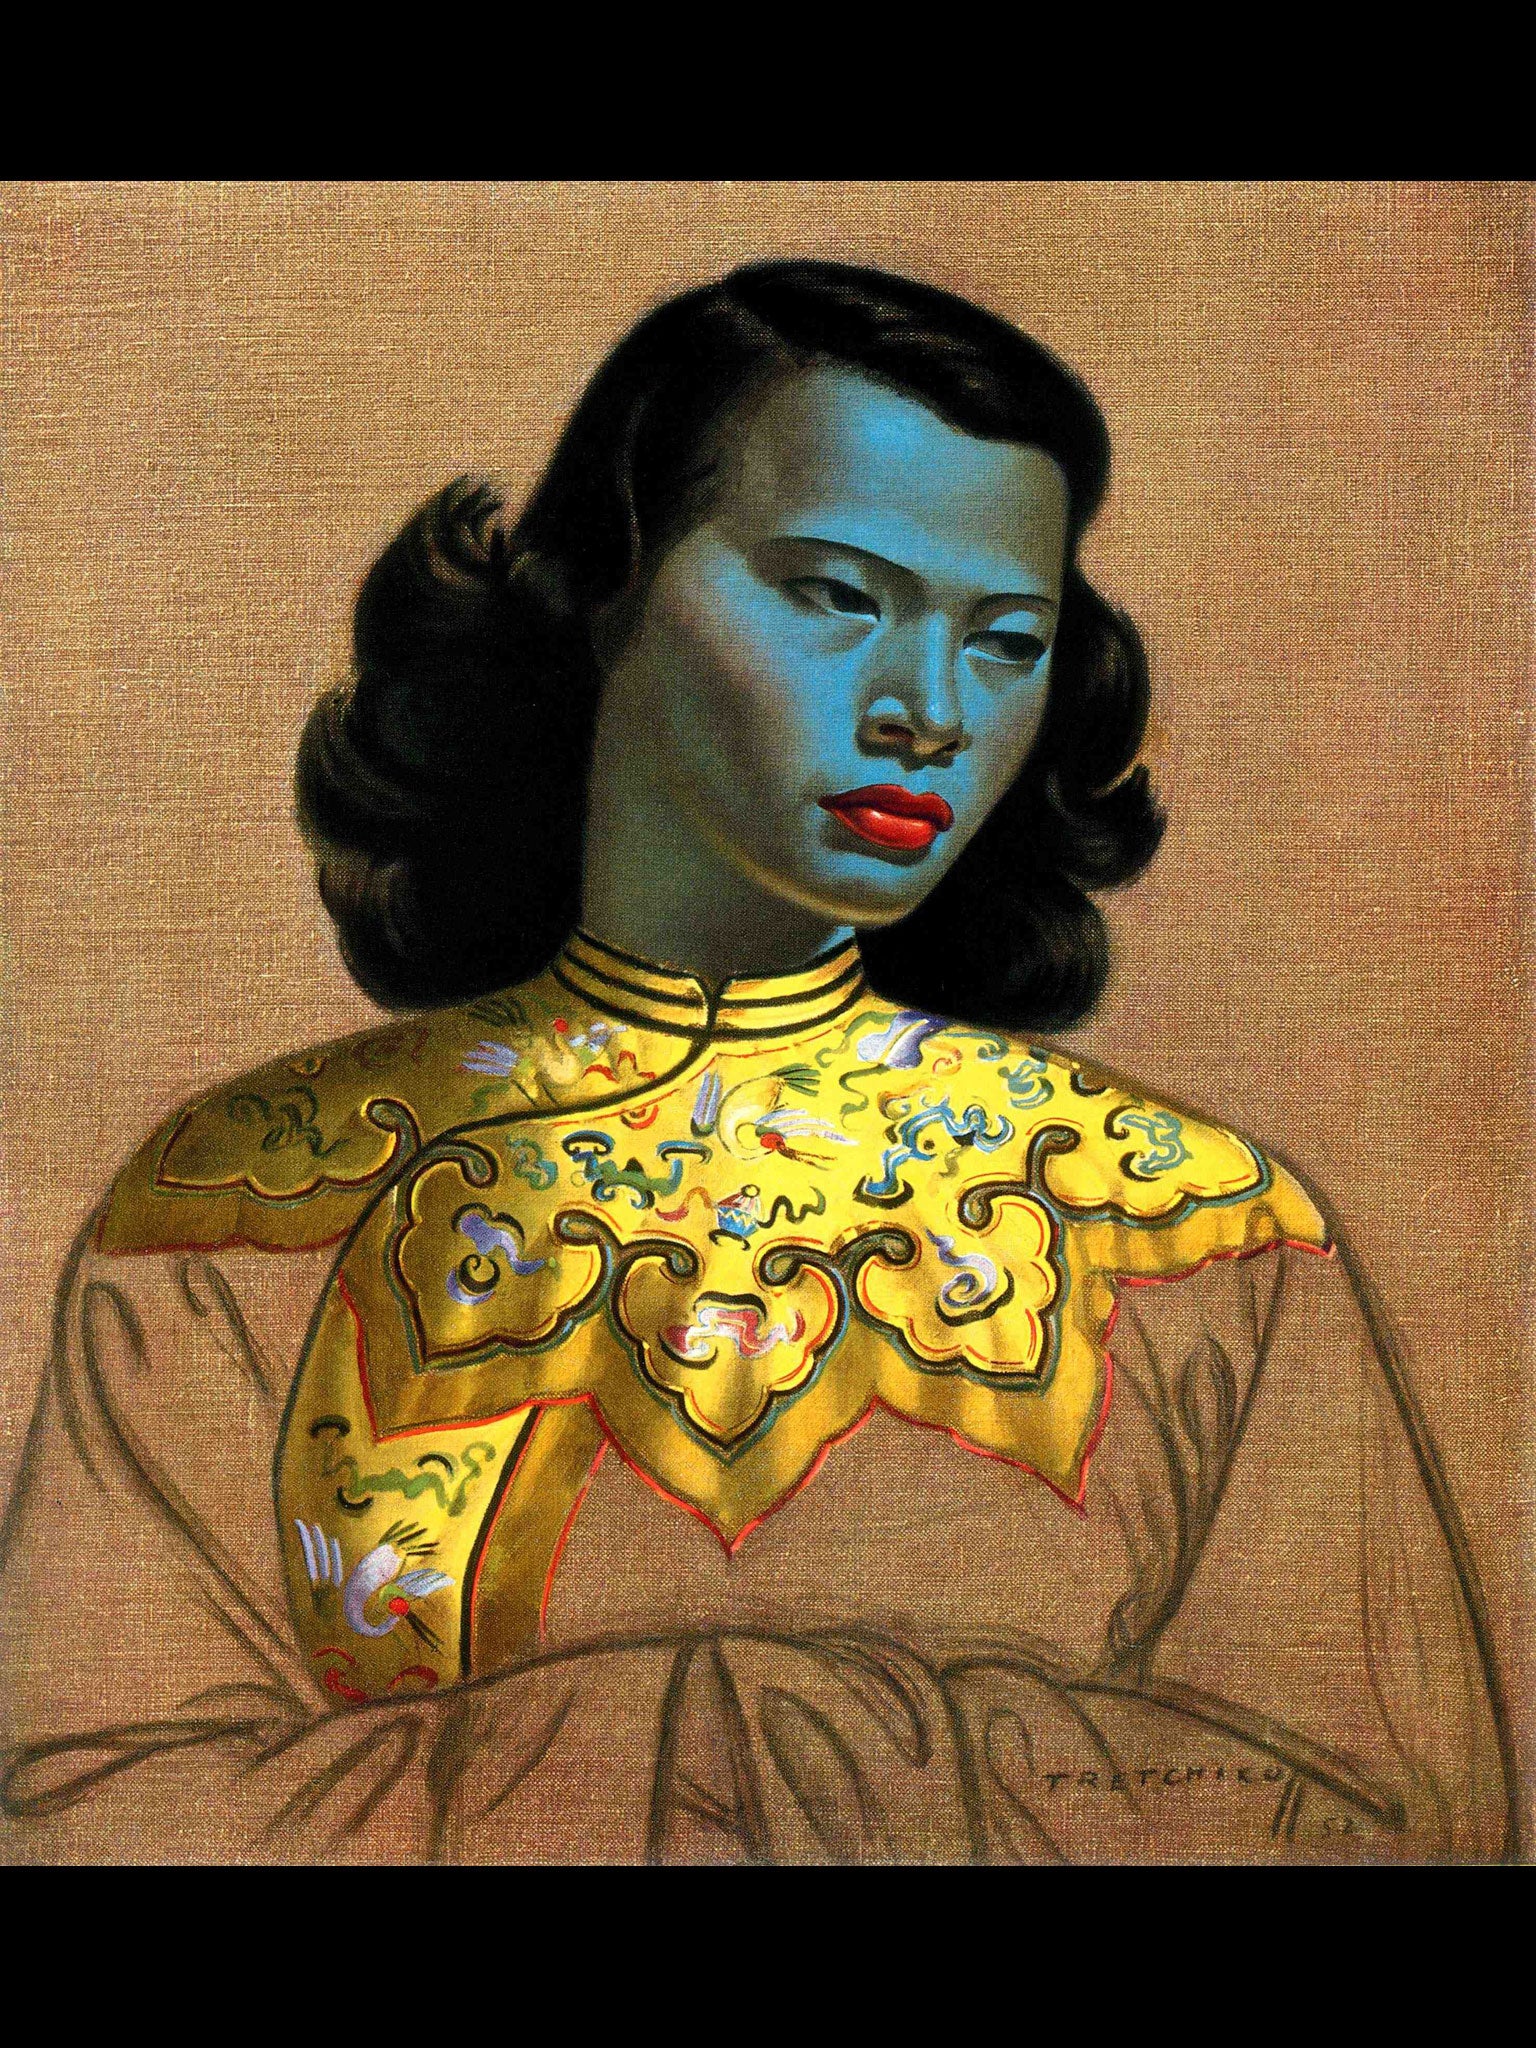 Vladimir Tretchikoff, owned The Chinese Girl, which is expected to fetch up to £500,000 when it is auctioned in London on Wednesday. Its American owner, who bought it for $2,000 in 1954, only learned of its fame by chance because it was never distributed